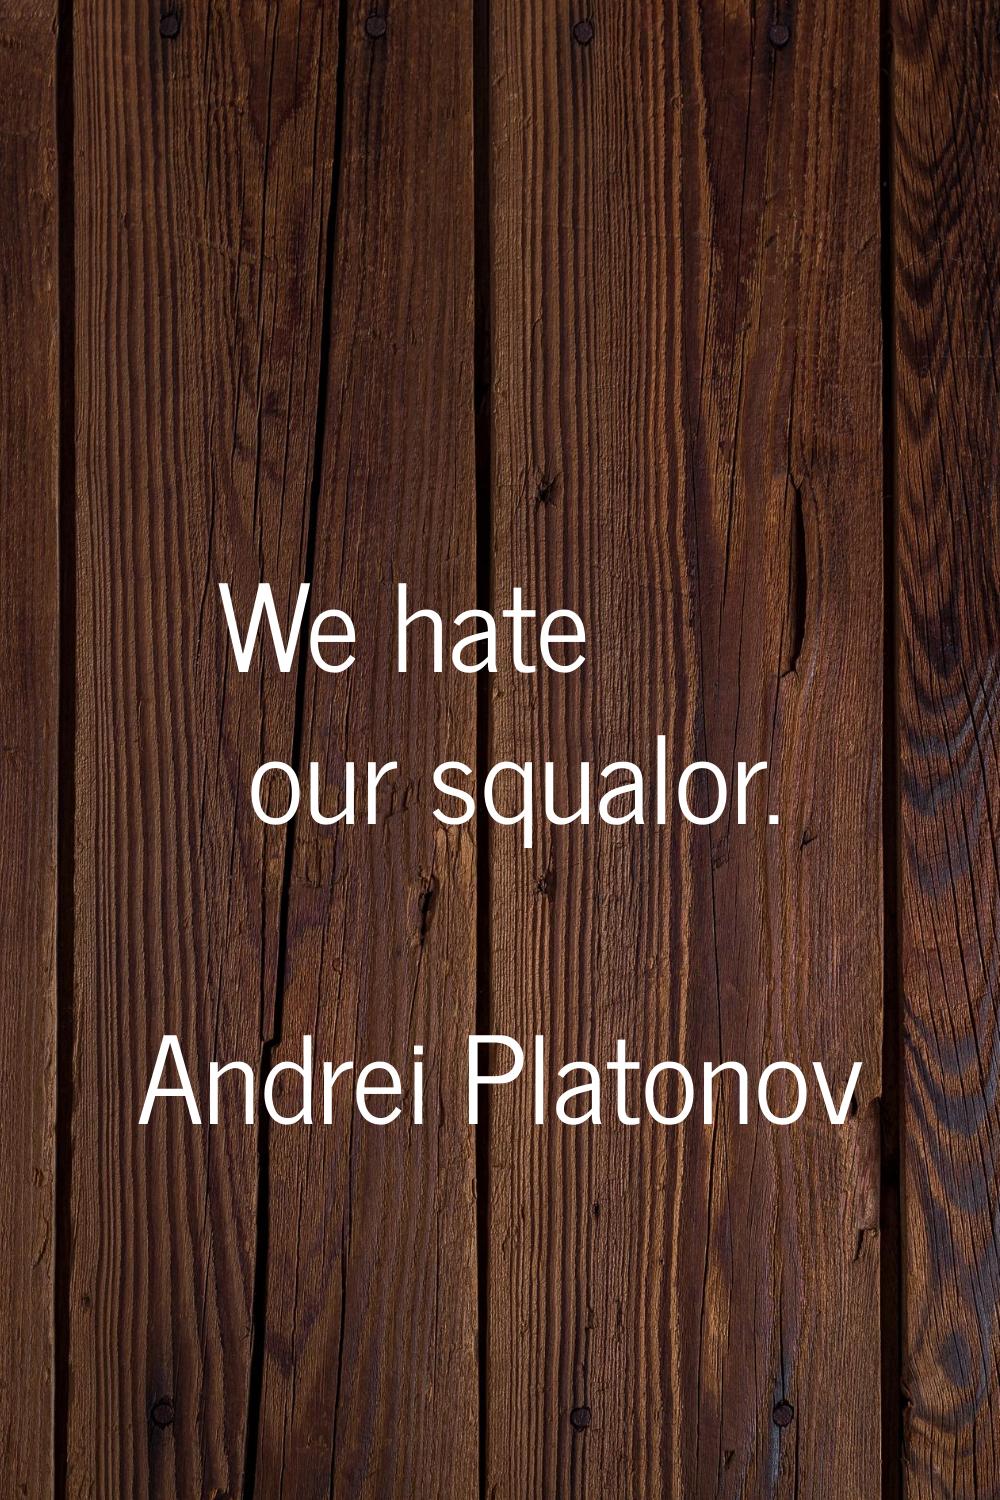 We hate our squalor.